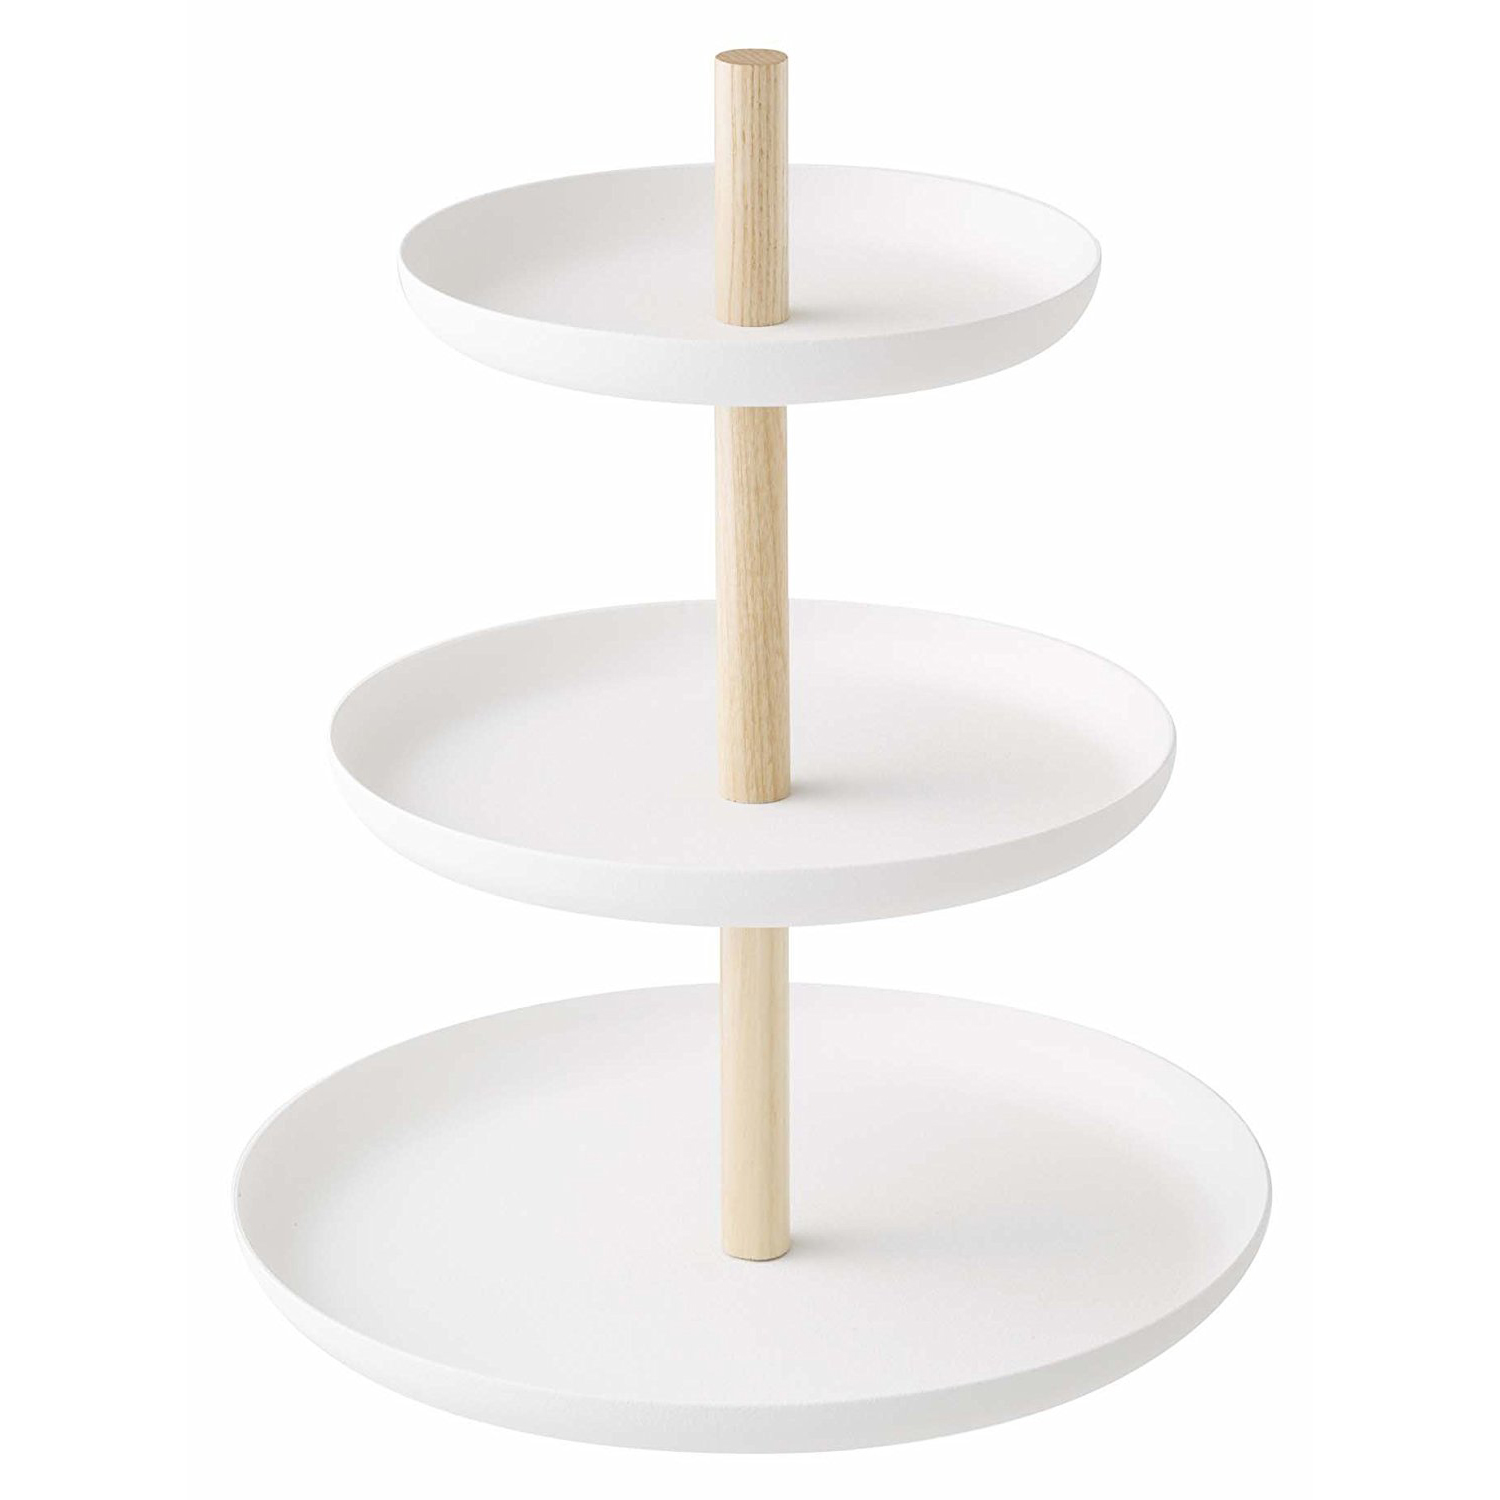 3-Tier Cake Stand, $25